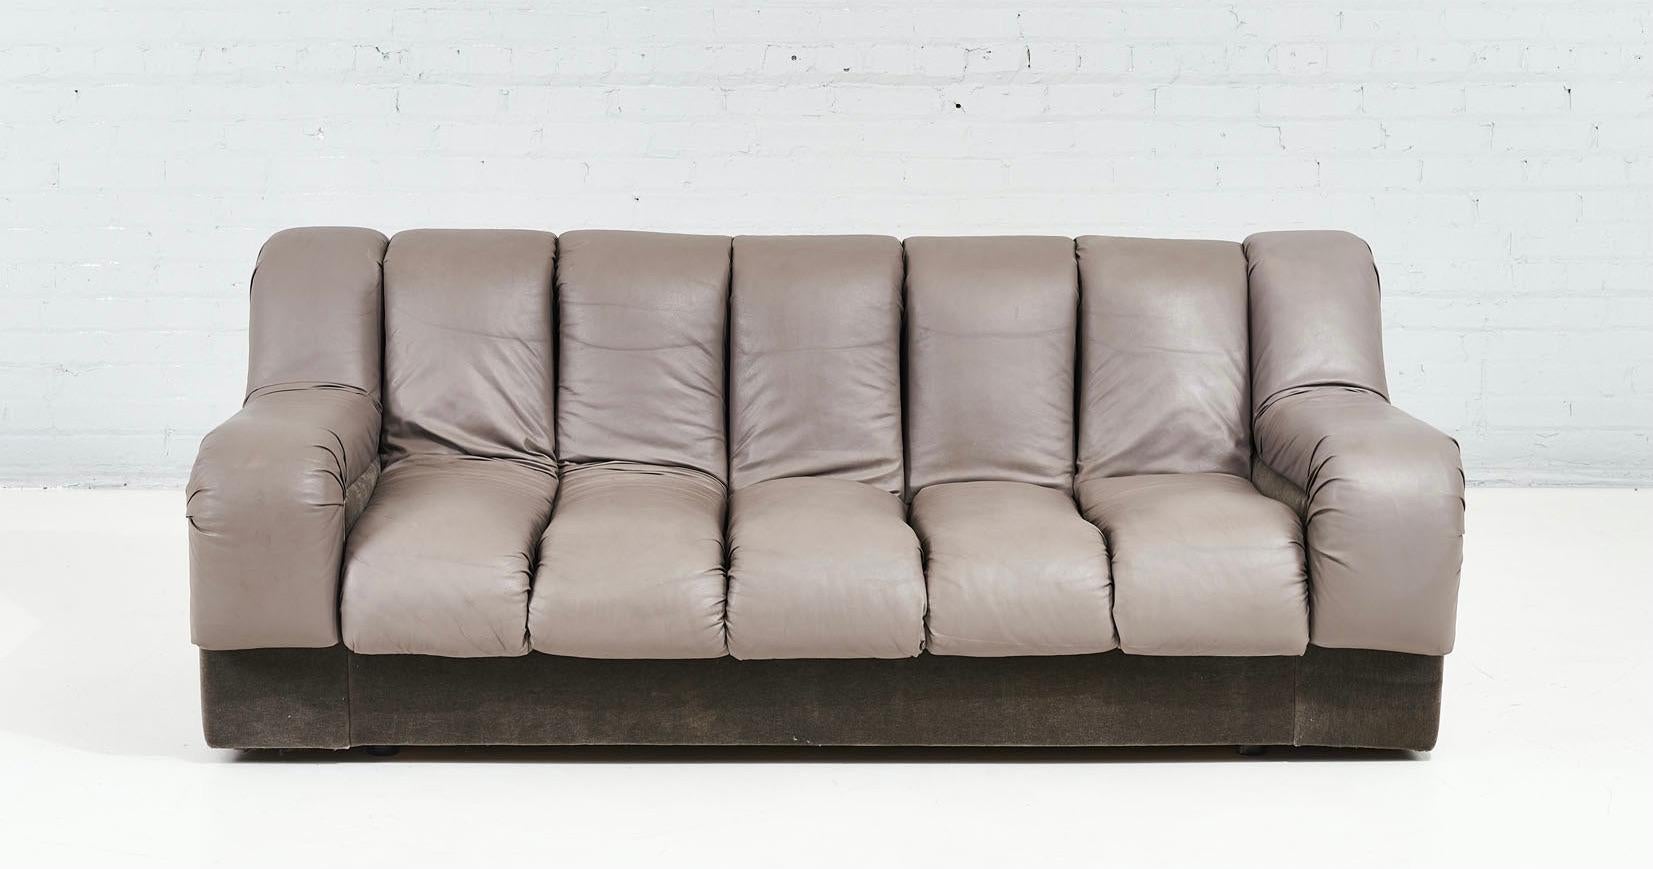 Steve Chase Style Non Stop Channeled Tufted Sofa, 1970. Upholstered sofa in mohair and naugahyde

